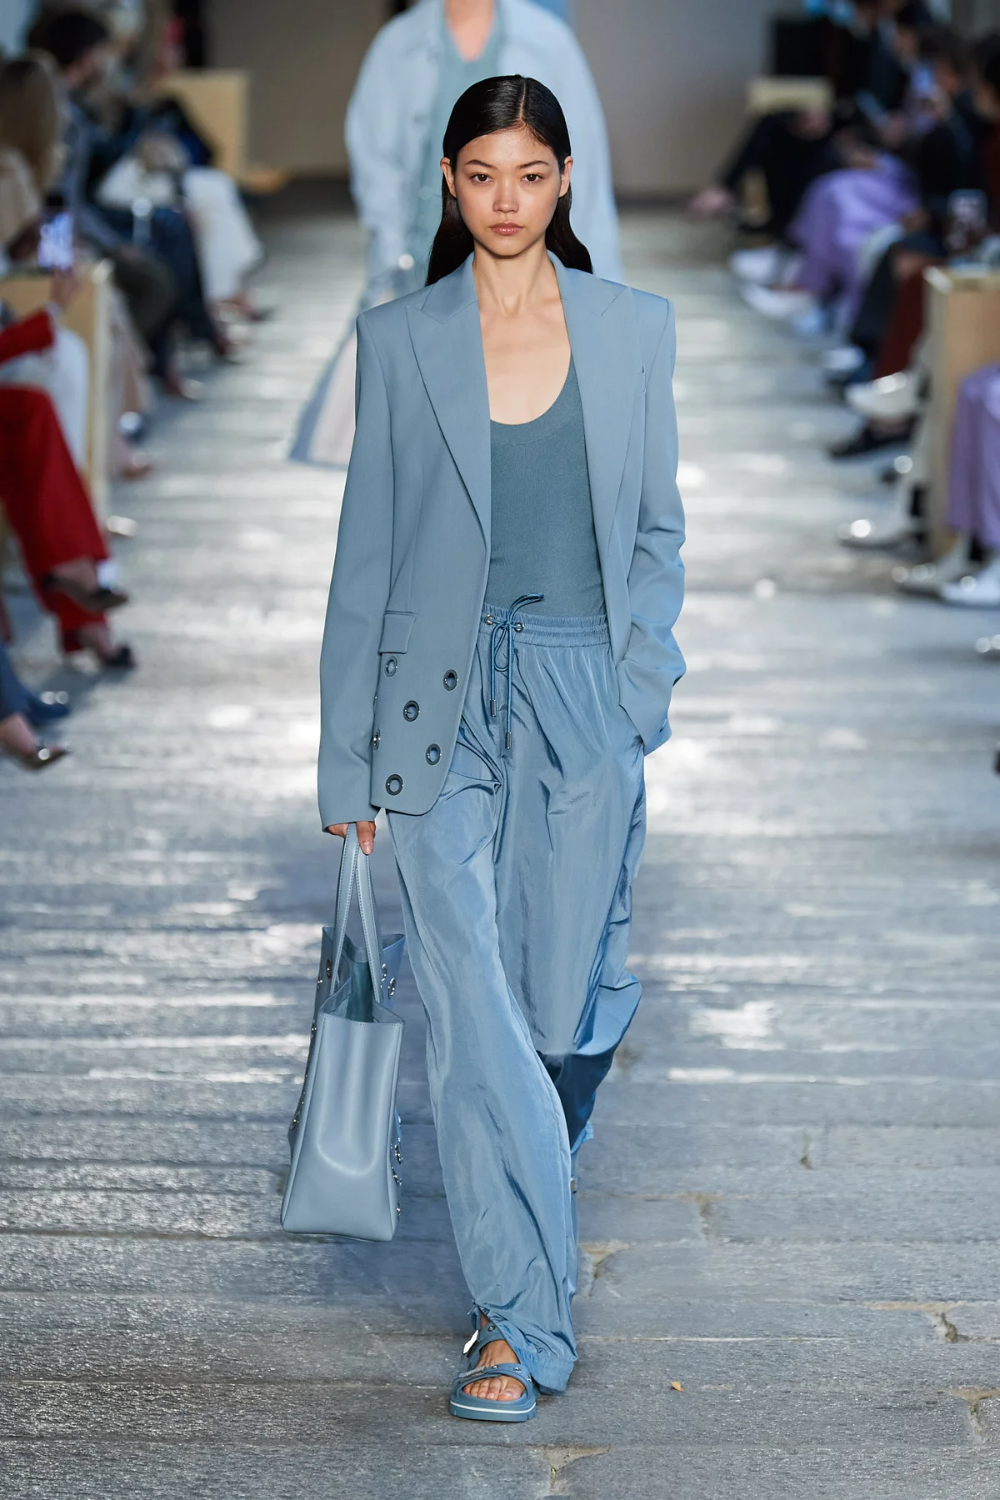 Fashion's Top 7 Color Trends from the Spring/Summer 2021 Runways ...